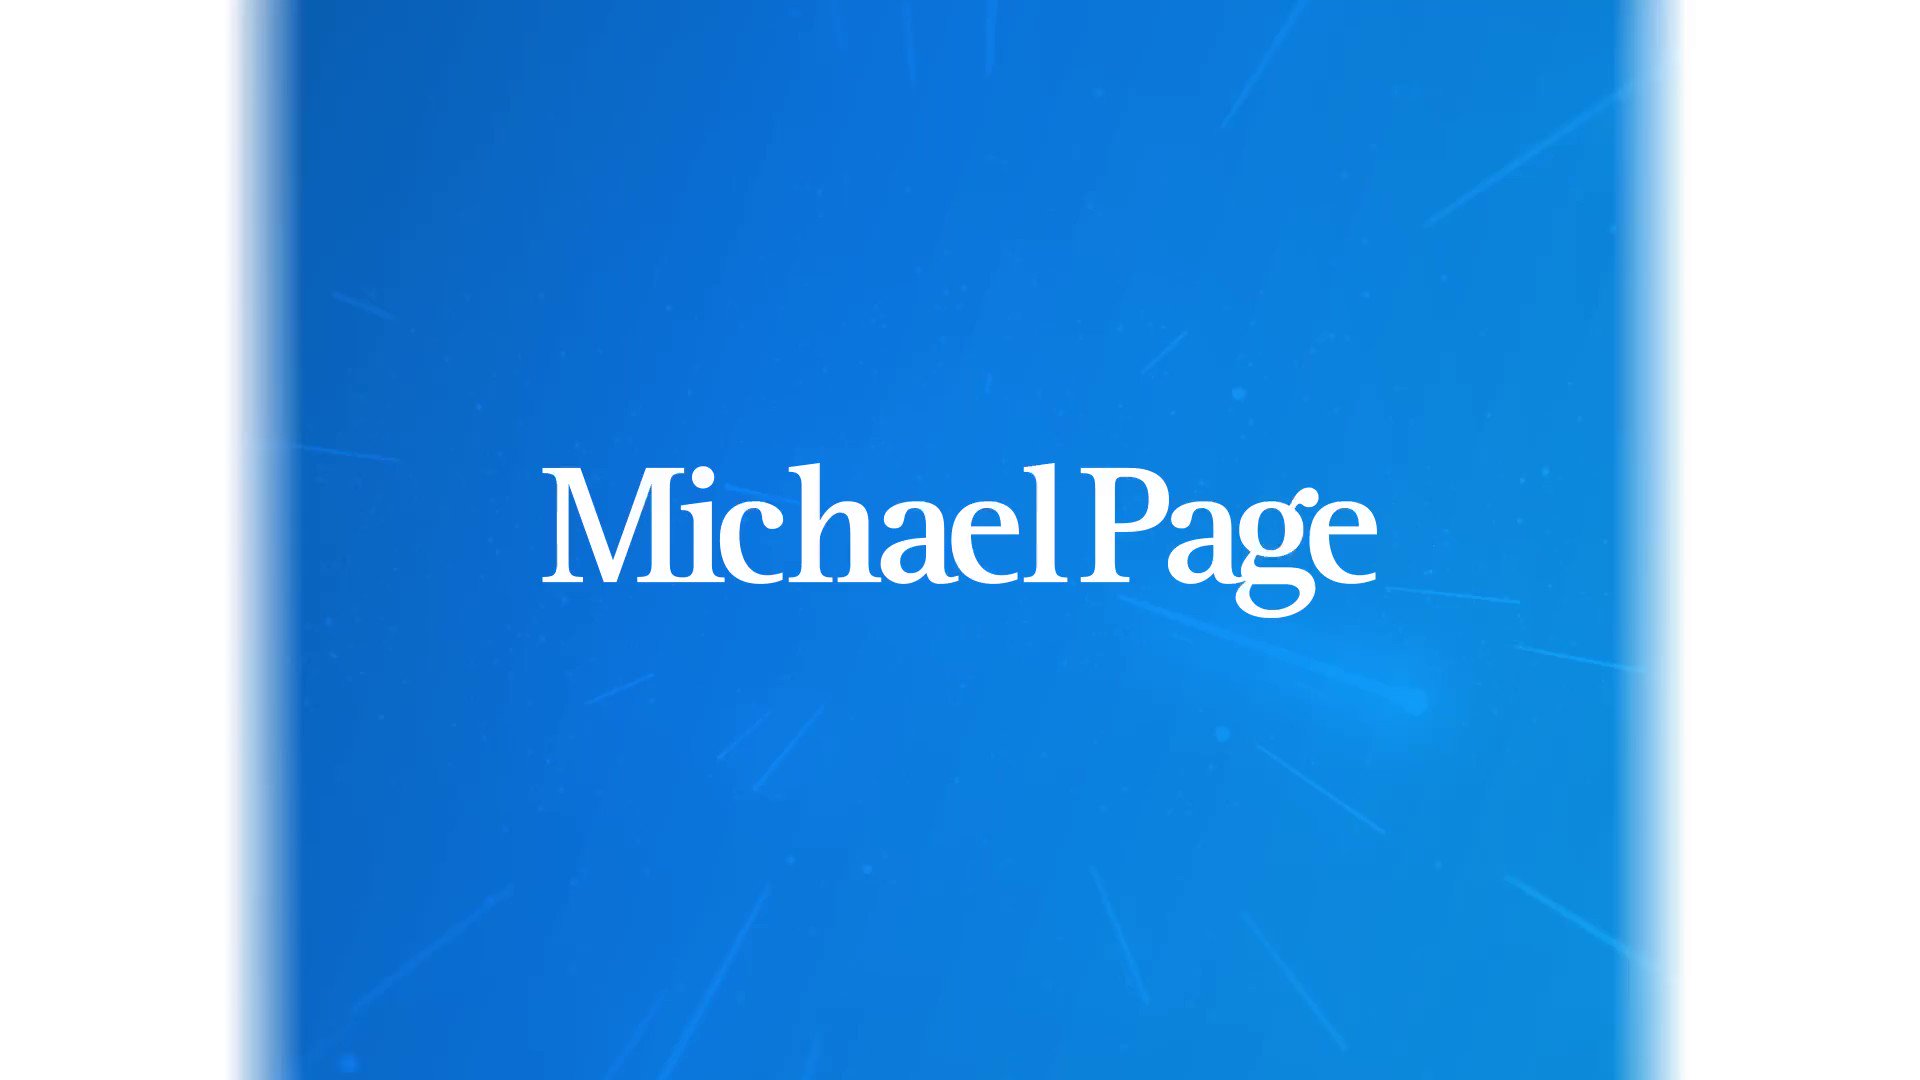 Michael Page provides a new vacancies in DUBAI for all nationalities